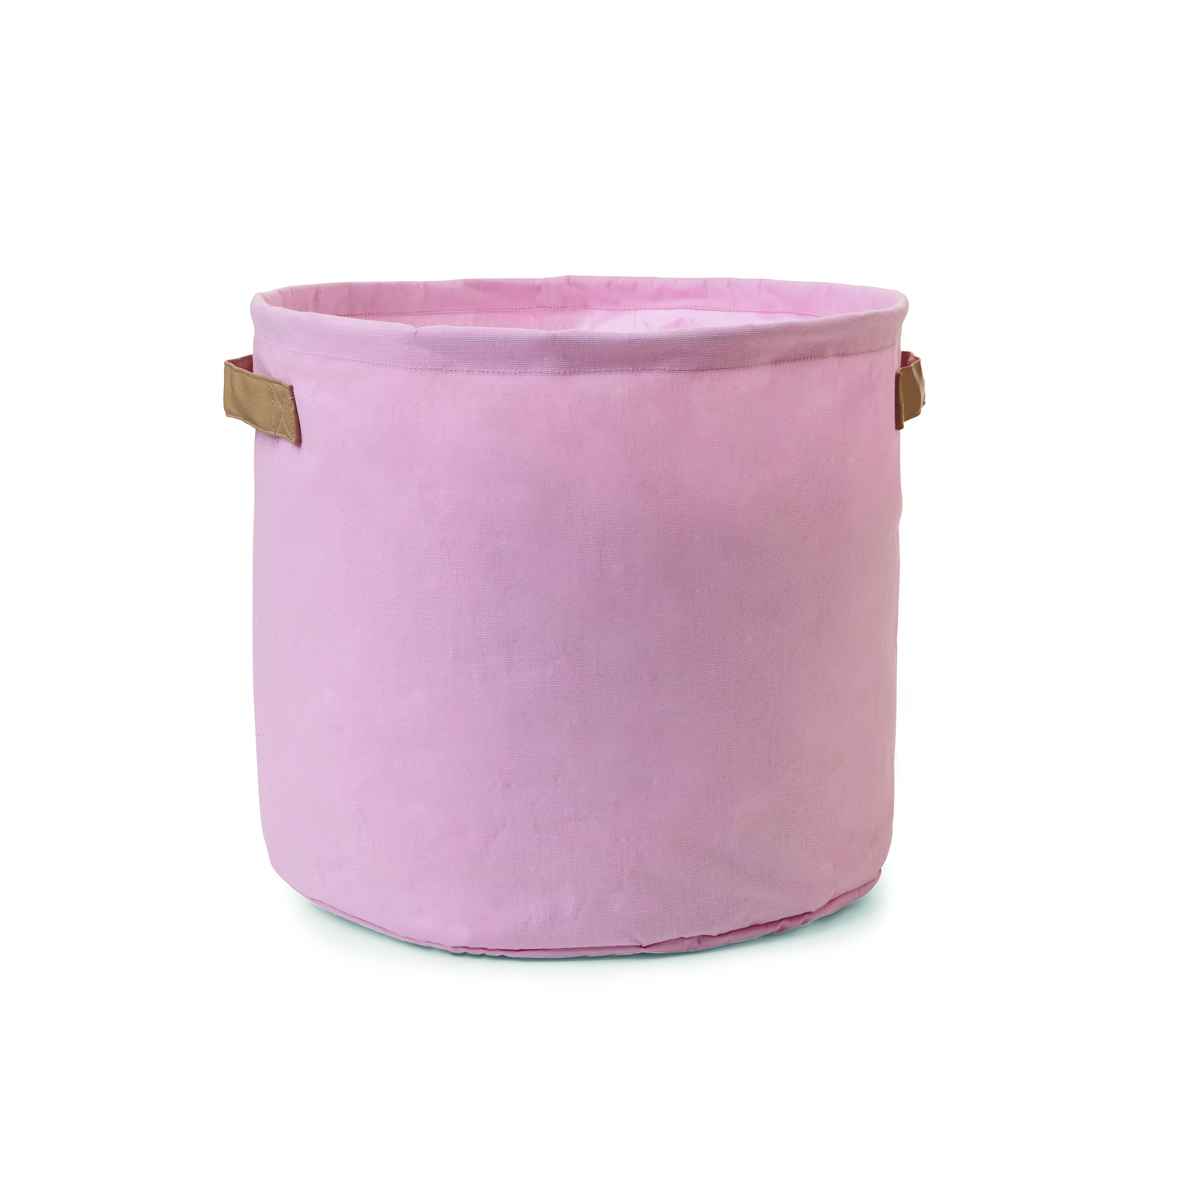 Collapsible Hamper - Small, Pink